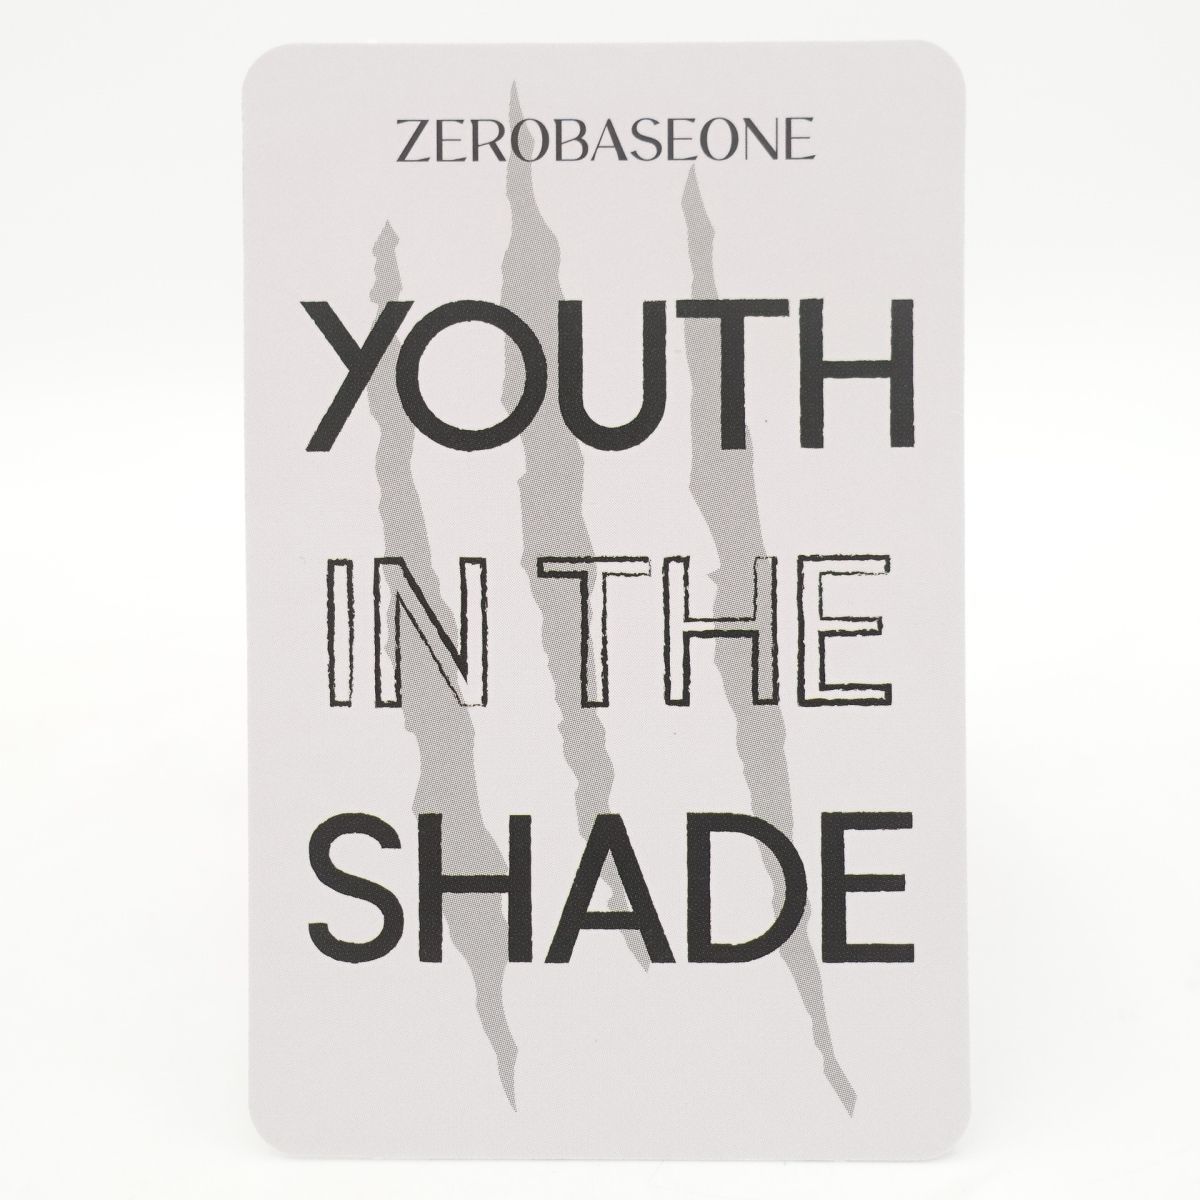 ZEROBASEONE ユジン YOUTH in THE SHADE soundwave特典 トレカ フォト 